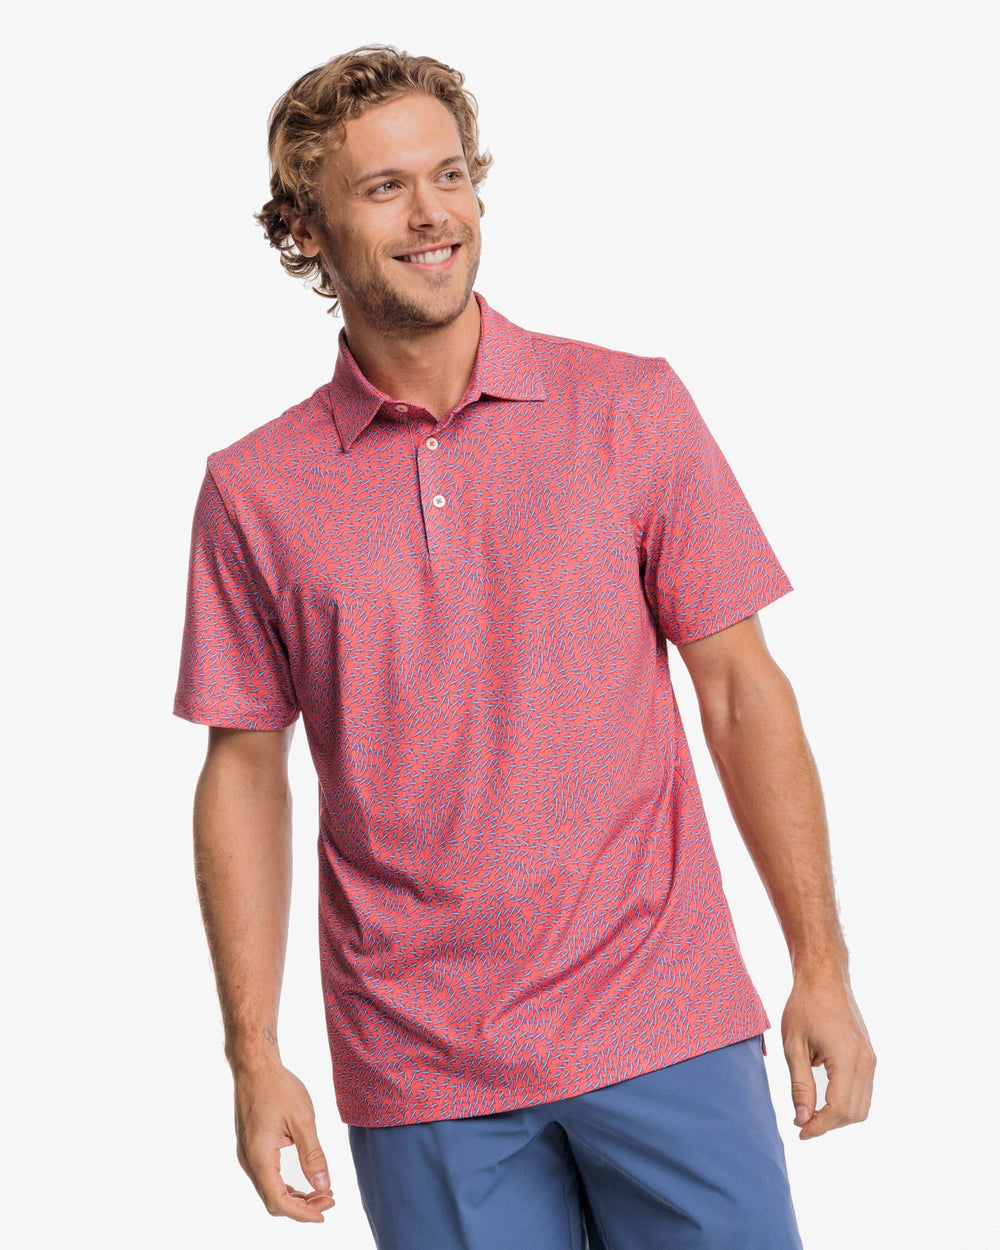 The front view of the Southern Tide Driver Stay in Schools Polo Shirt by Southern Tide - Rosewood Red